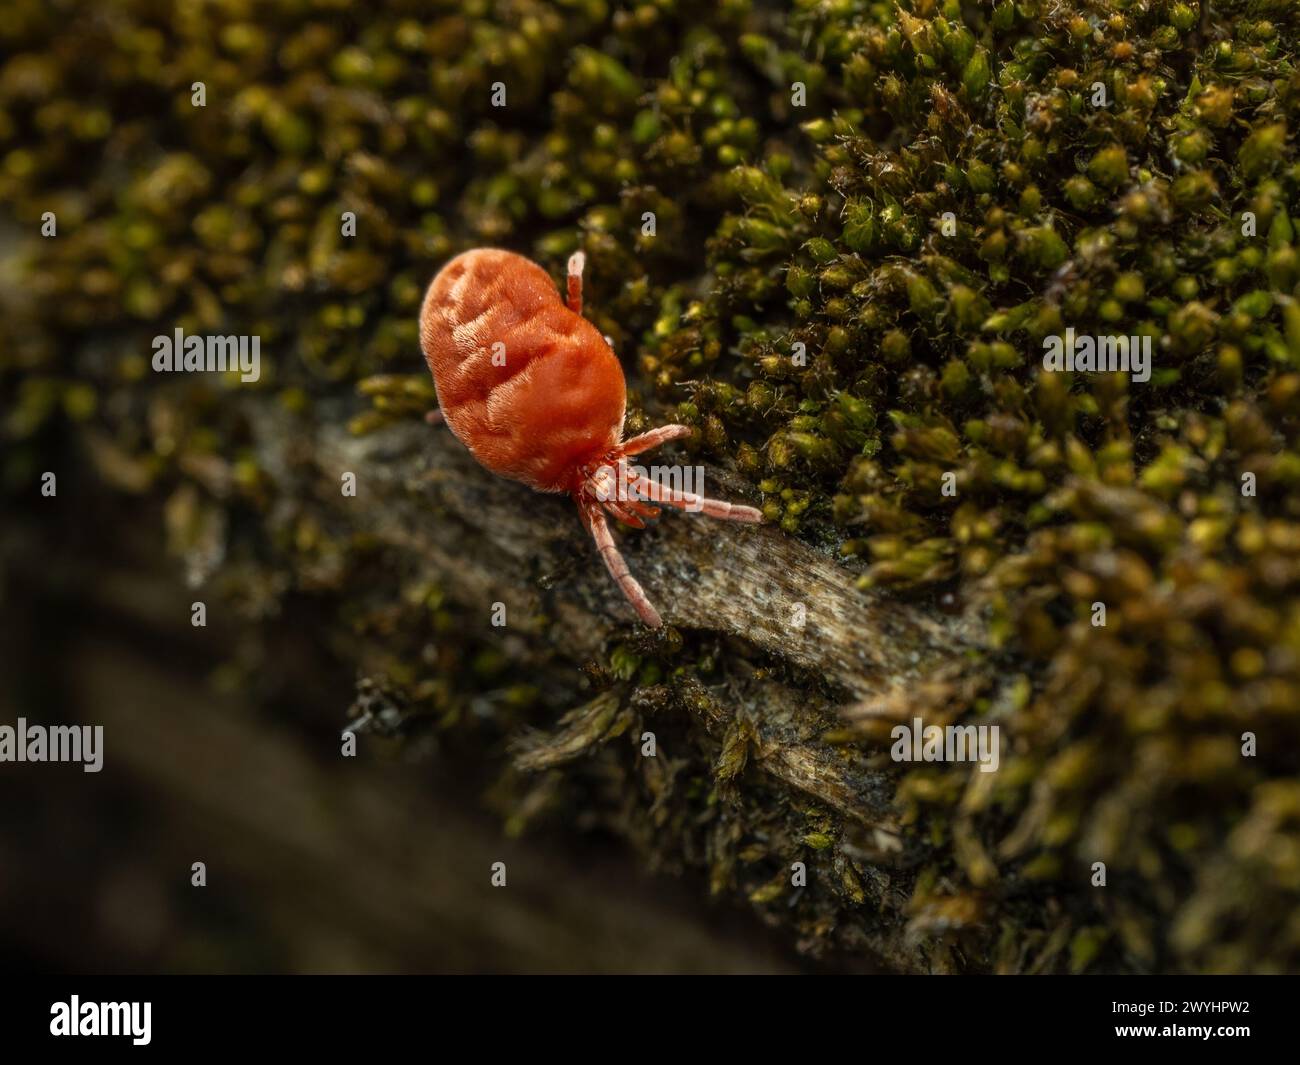 A tiny red velvet mite, Trombidiidae species, crawling on a moss covered log in the Boundary Bay salt marsh Stock Photo